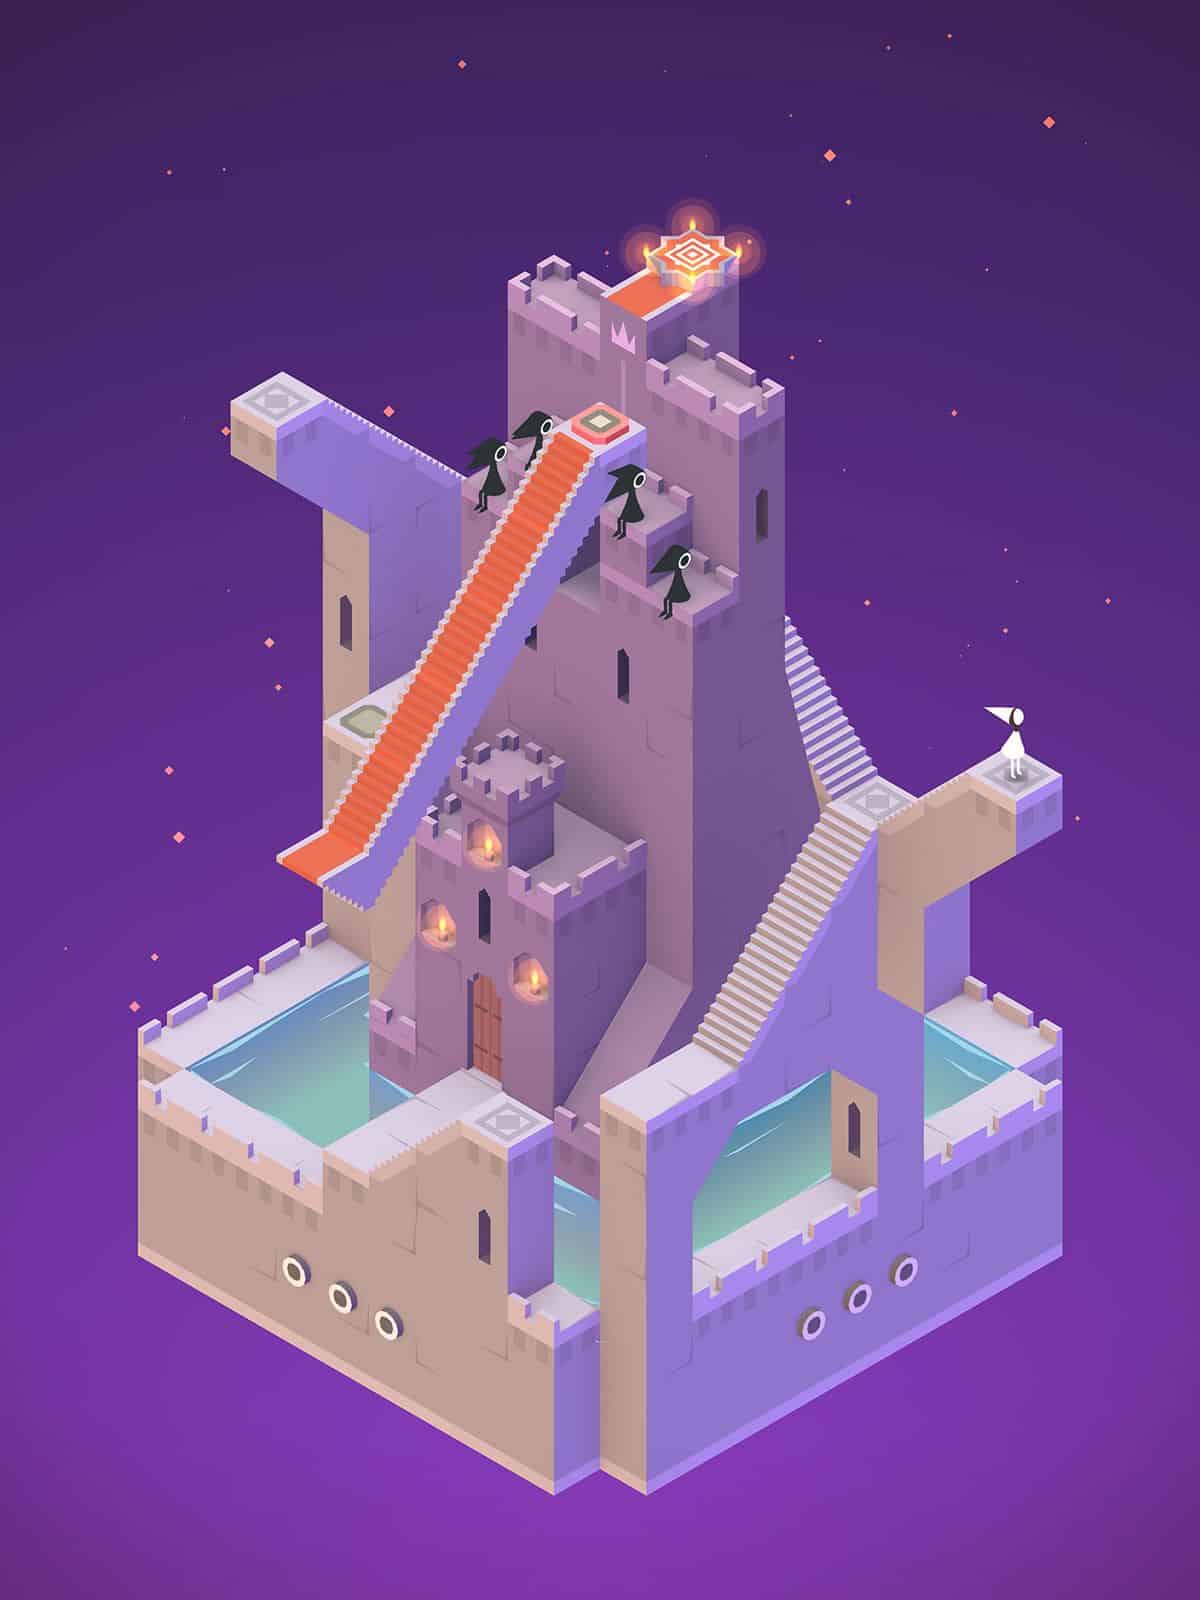 Monument Valley game helps to improve a player's resourcefulness and mindfulness